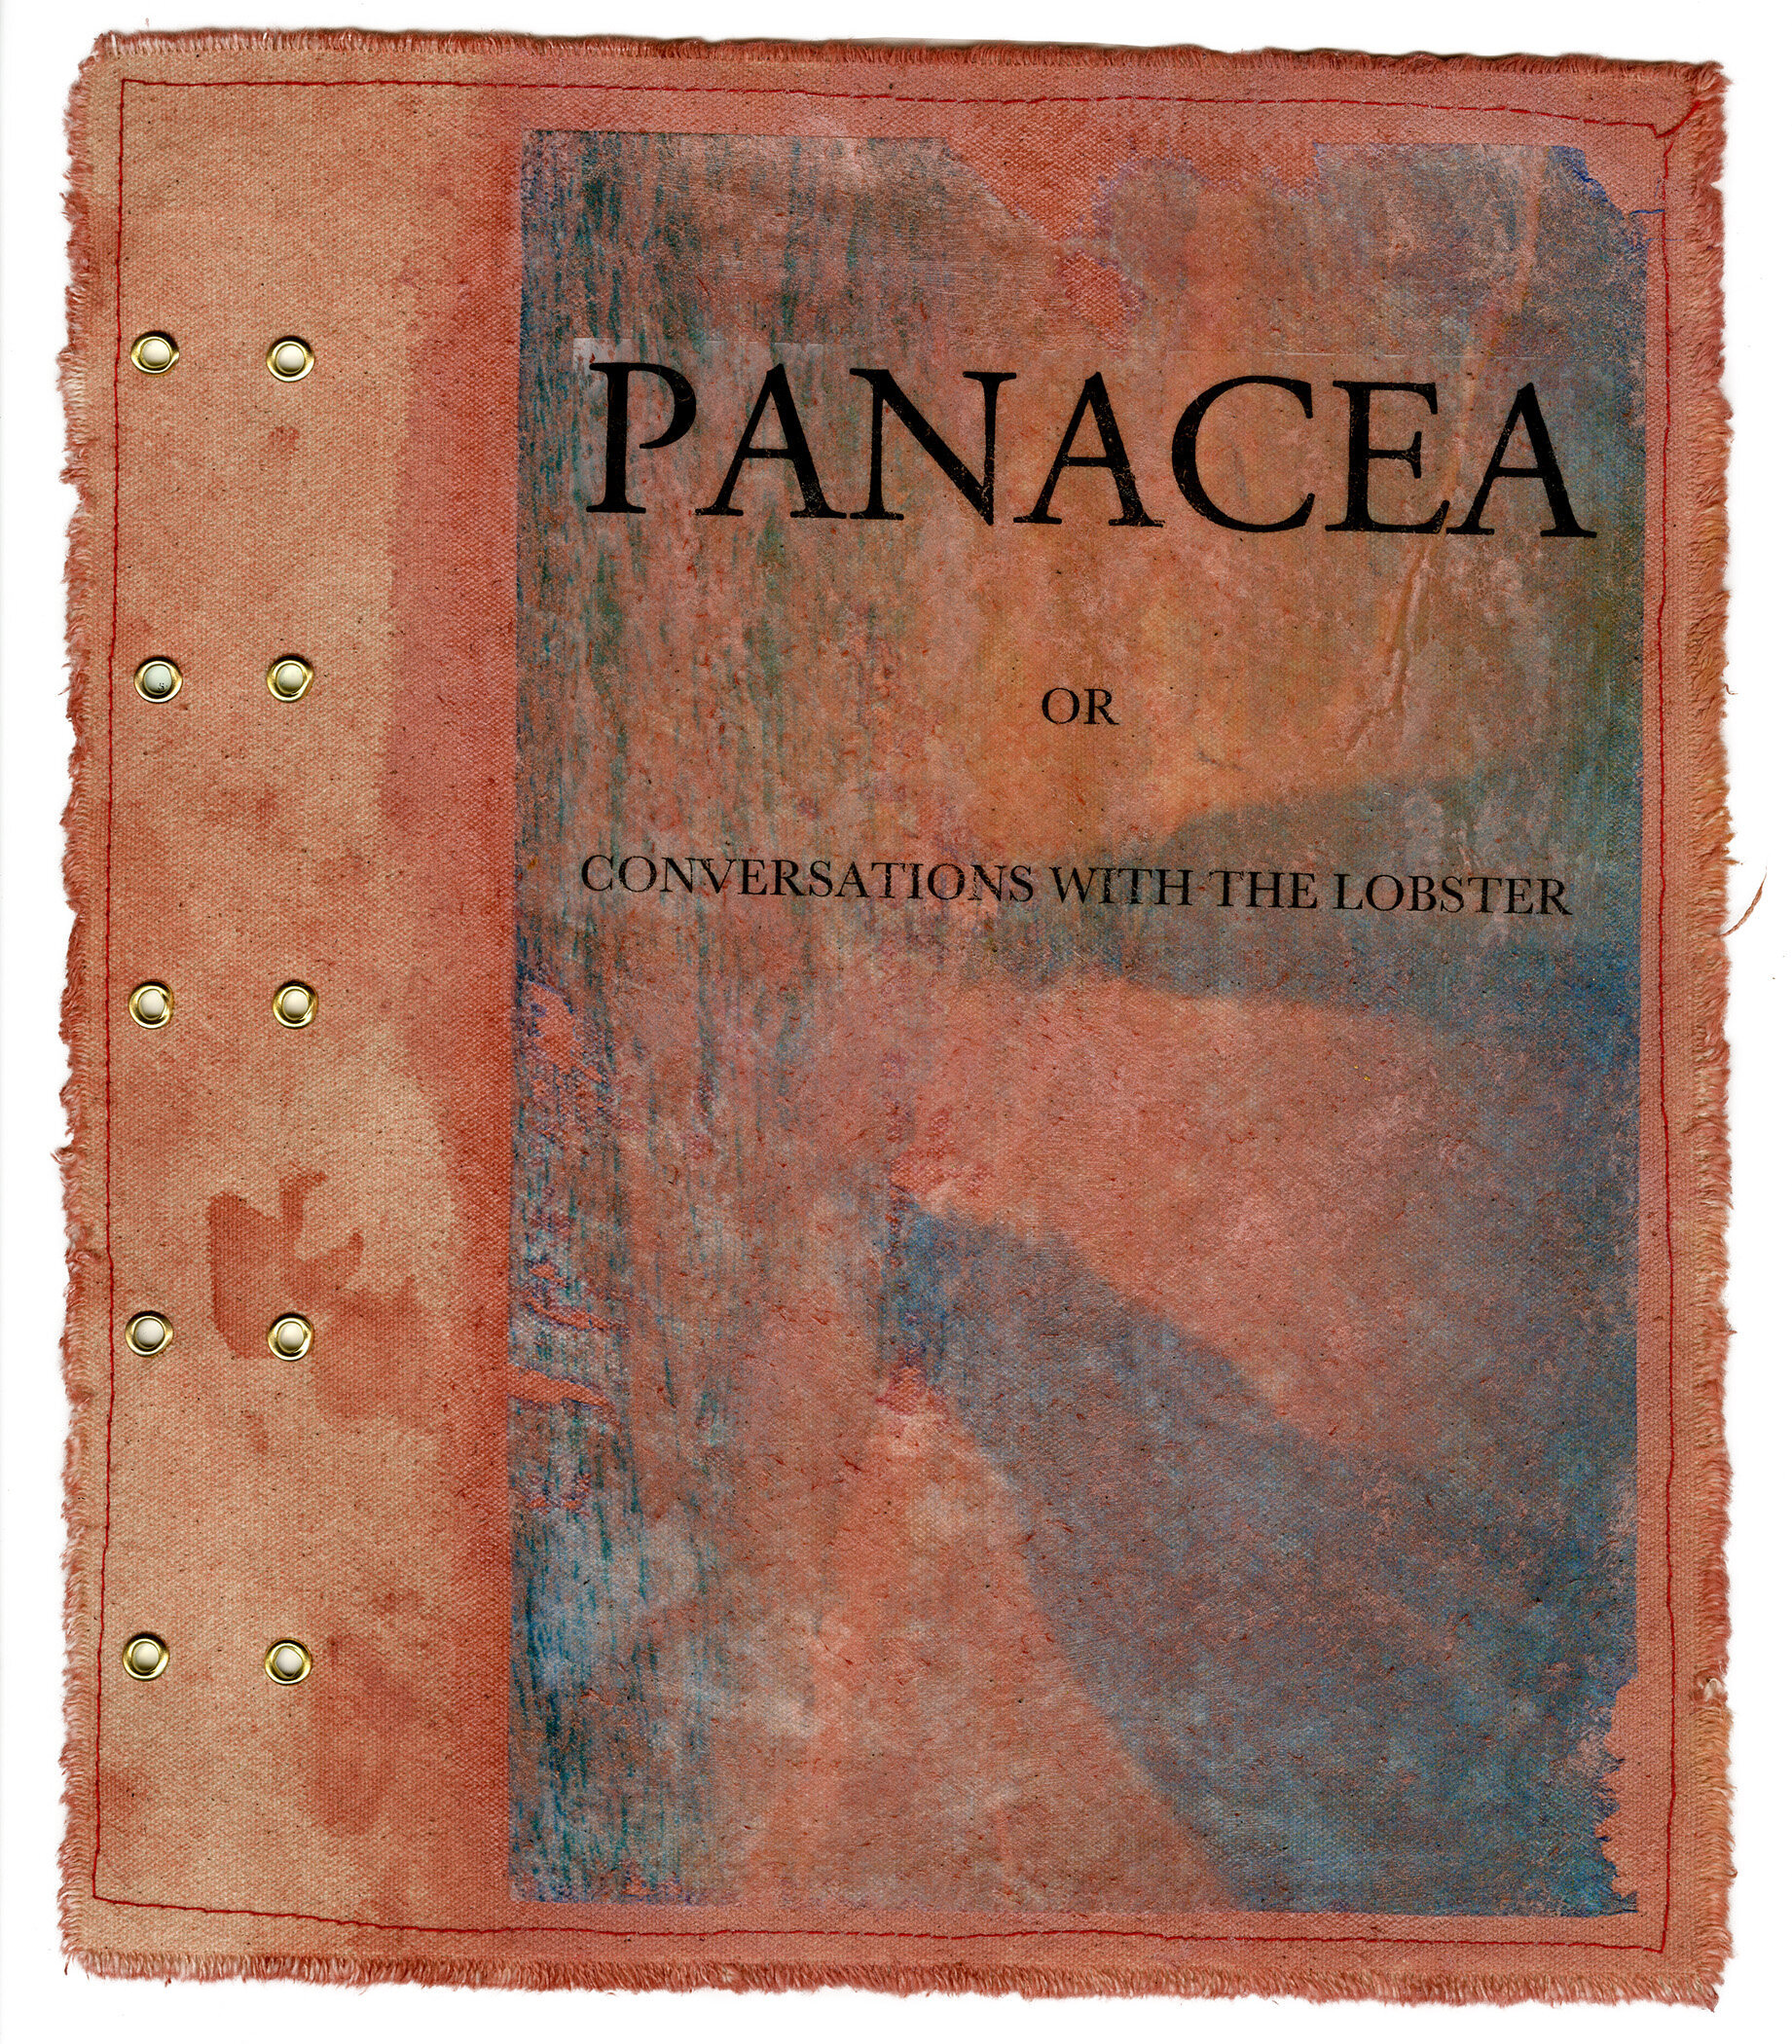 PANACEA, OR CONVERSATIONS WITH THE LOBSTER